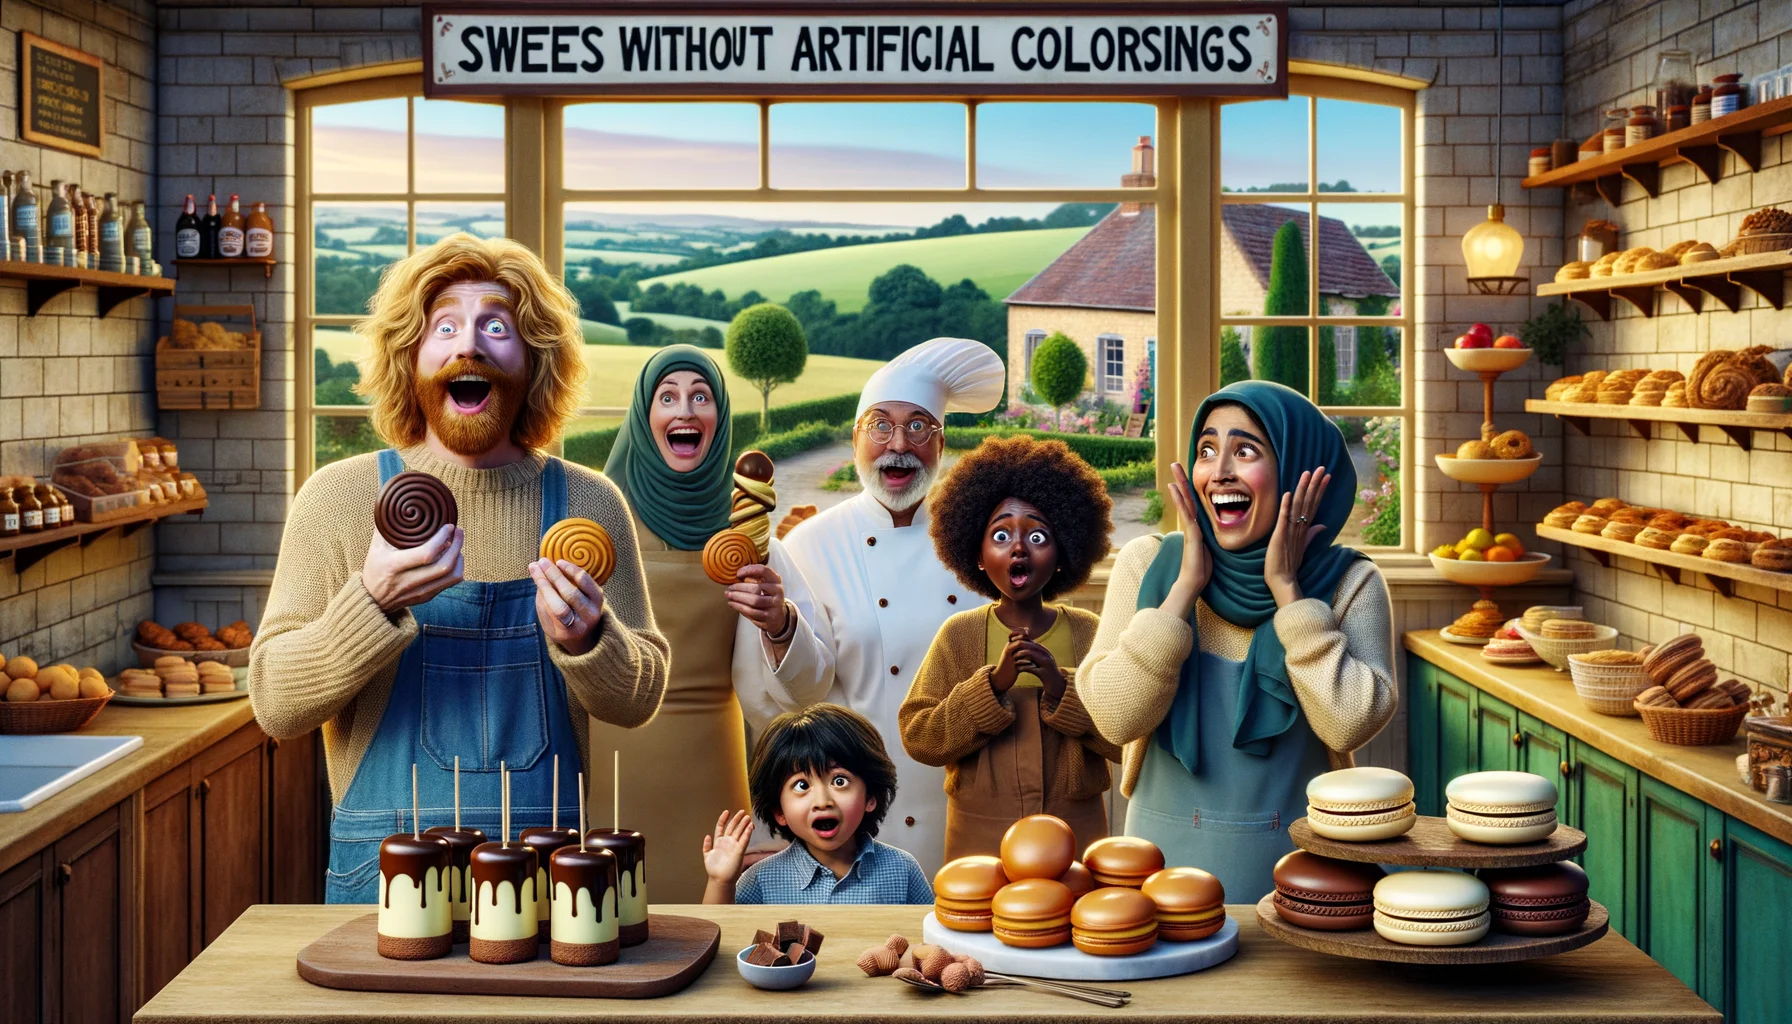 Imagine a humorous and realistic scene set in a charming little bakery overlooking a peaceful countryside landscape. Inside, a diverse group of people, including a Caucasian female baker, a South Asian male customer, and a Middle-Eastern child, are all showing exaggerated expressions of joy and surprise. They are holding natural-colored sweet treats without any artificial colorings - think deep brown chocolate cookies, golden caramel flans, and creamy white macarons. The bakery has a rustic, cosy interior with warm wooden furniture and a display of pastries overflowing with vibrant, fresh fruits. On the shop window, a big sign reads, 'Sweets Without Artificial Colorings'.